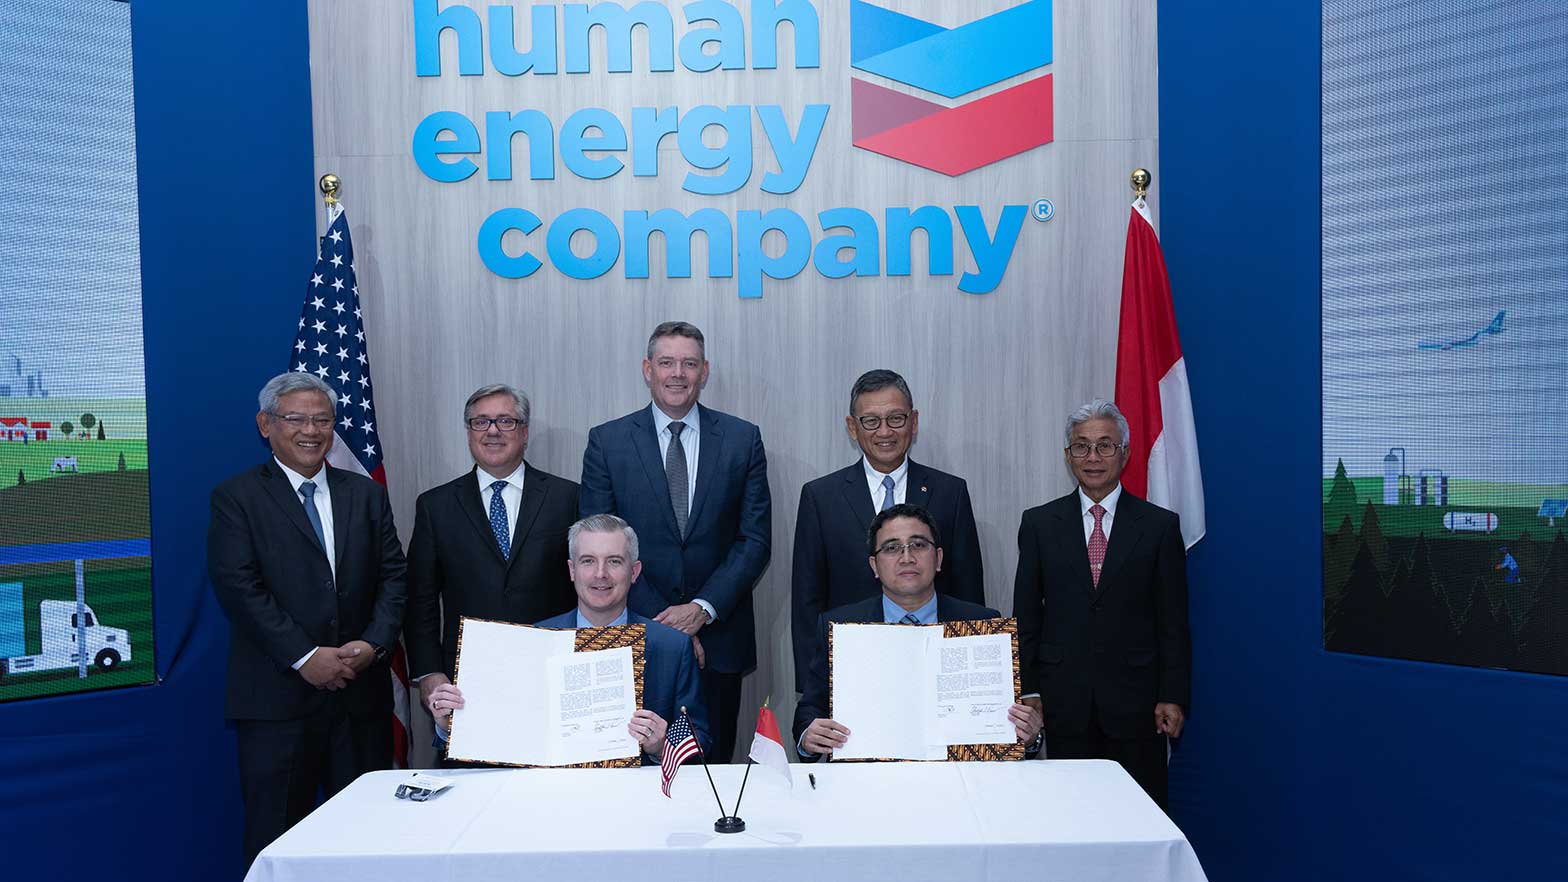 Representatives from Chevron and Pertamina, Indonesia’s national oil company, signed an agreement to explore CCUS possibilities during CERAWeek.